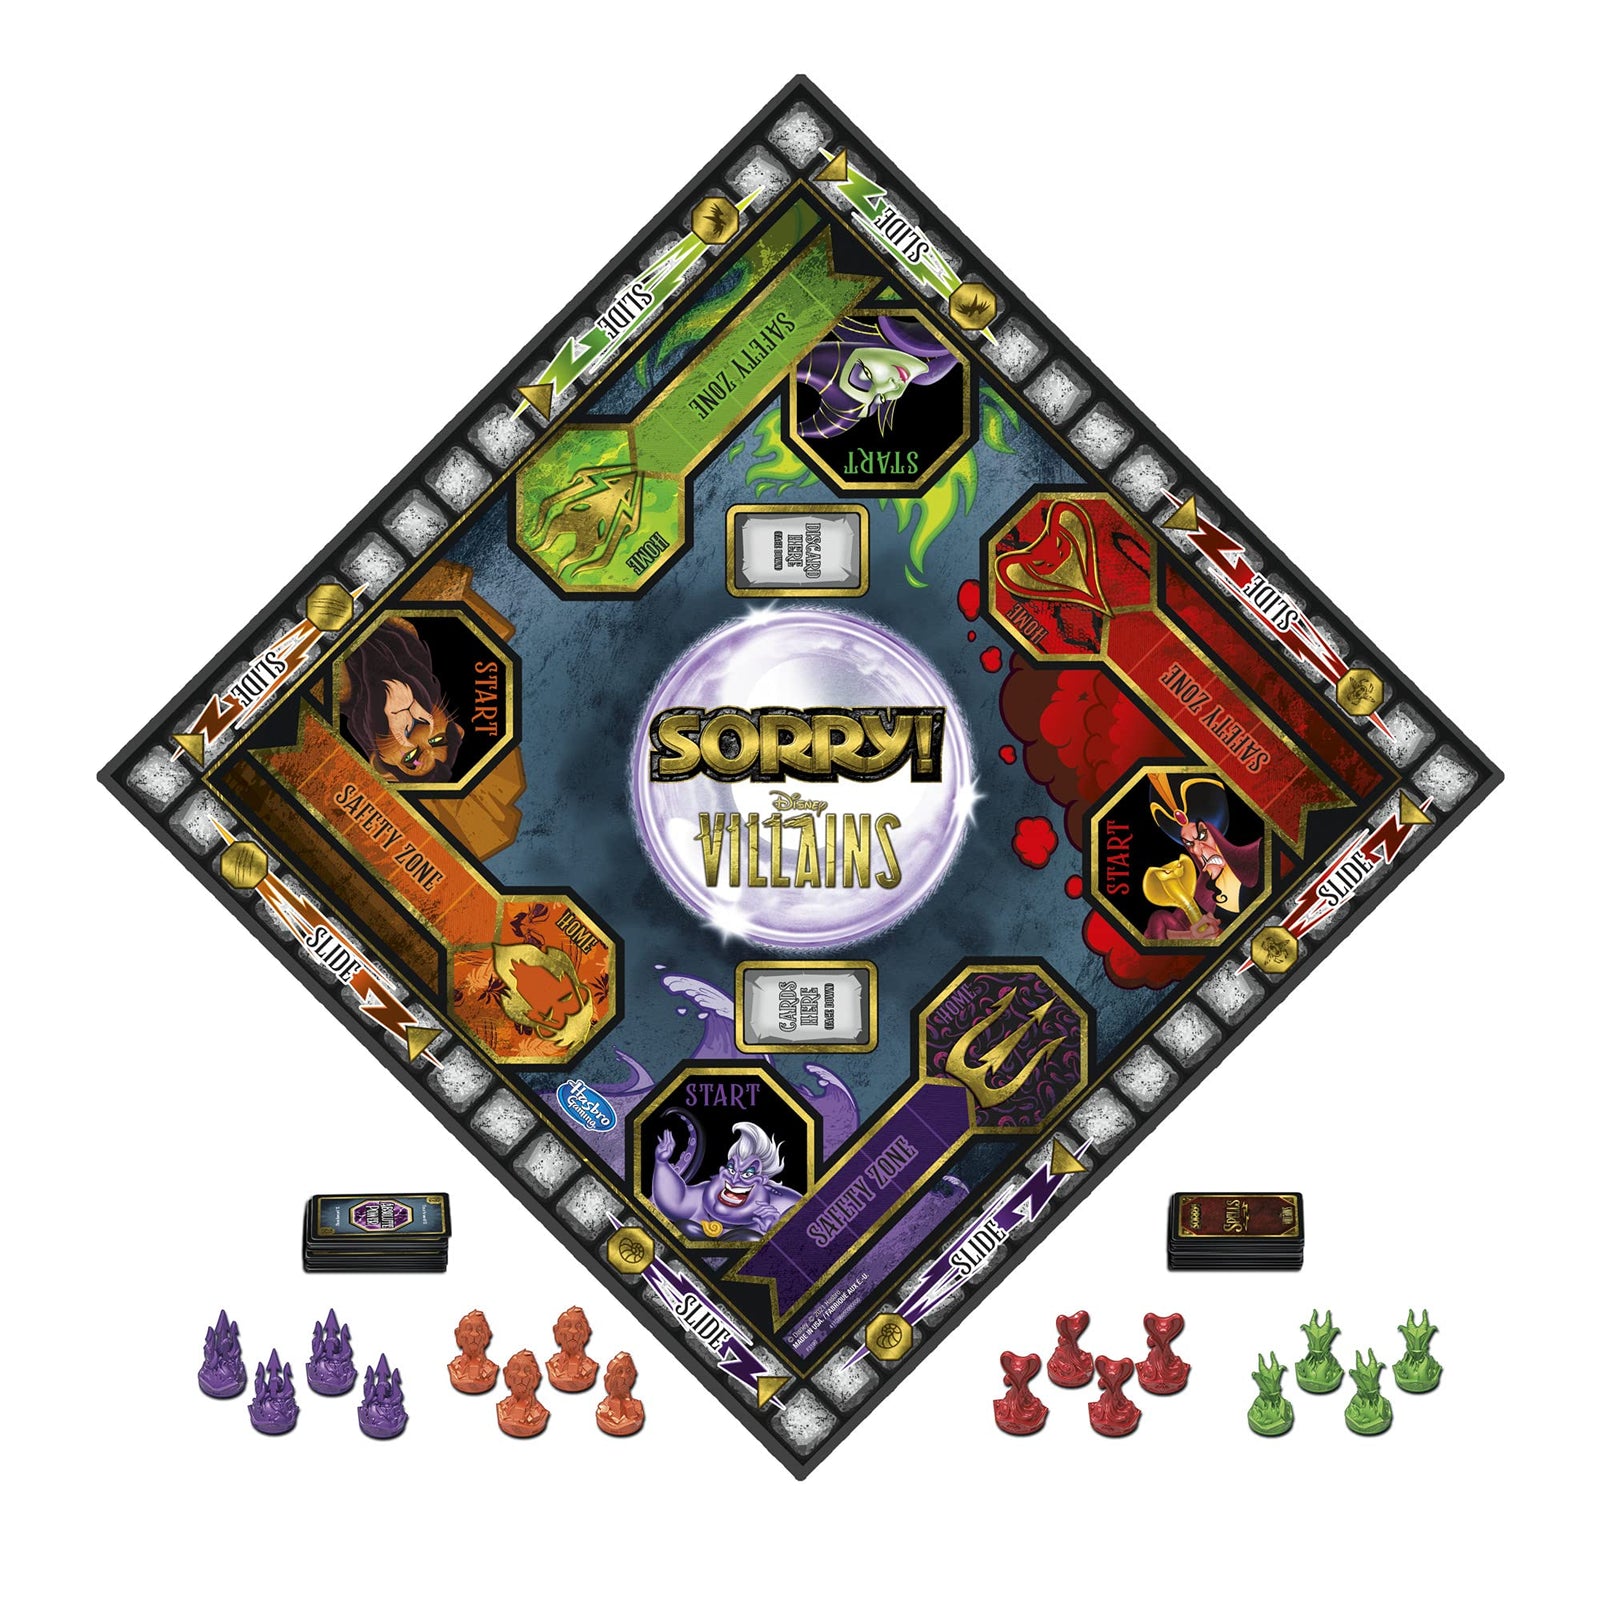 Hasbro Gaming Sorry! Board Game: Disney Villains Edition Kids Game, Family Games for Ages 6 and Up (Amazon Exclusive)